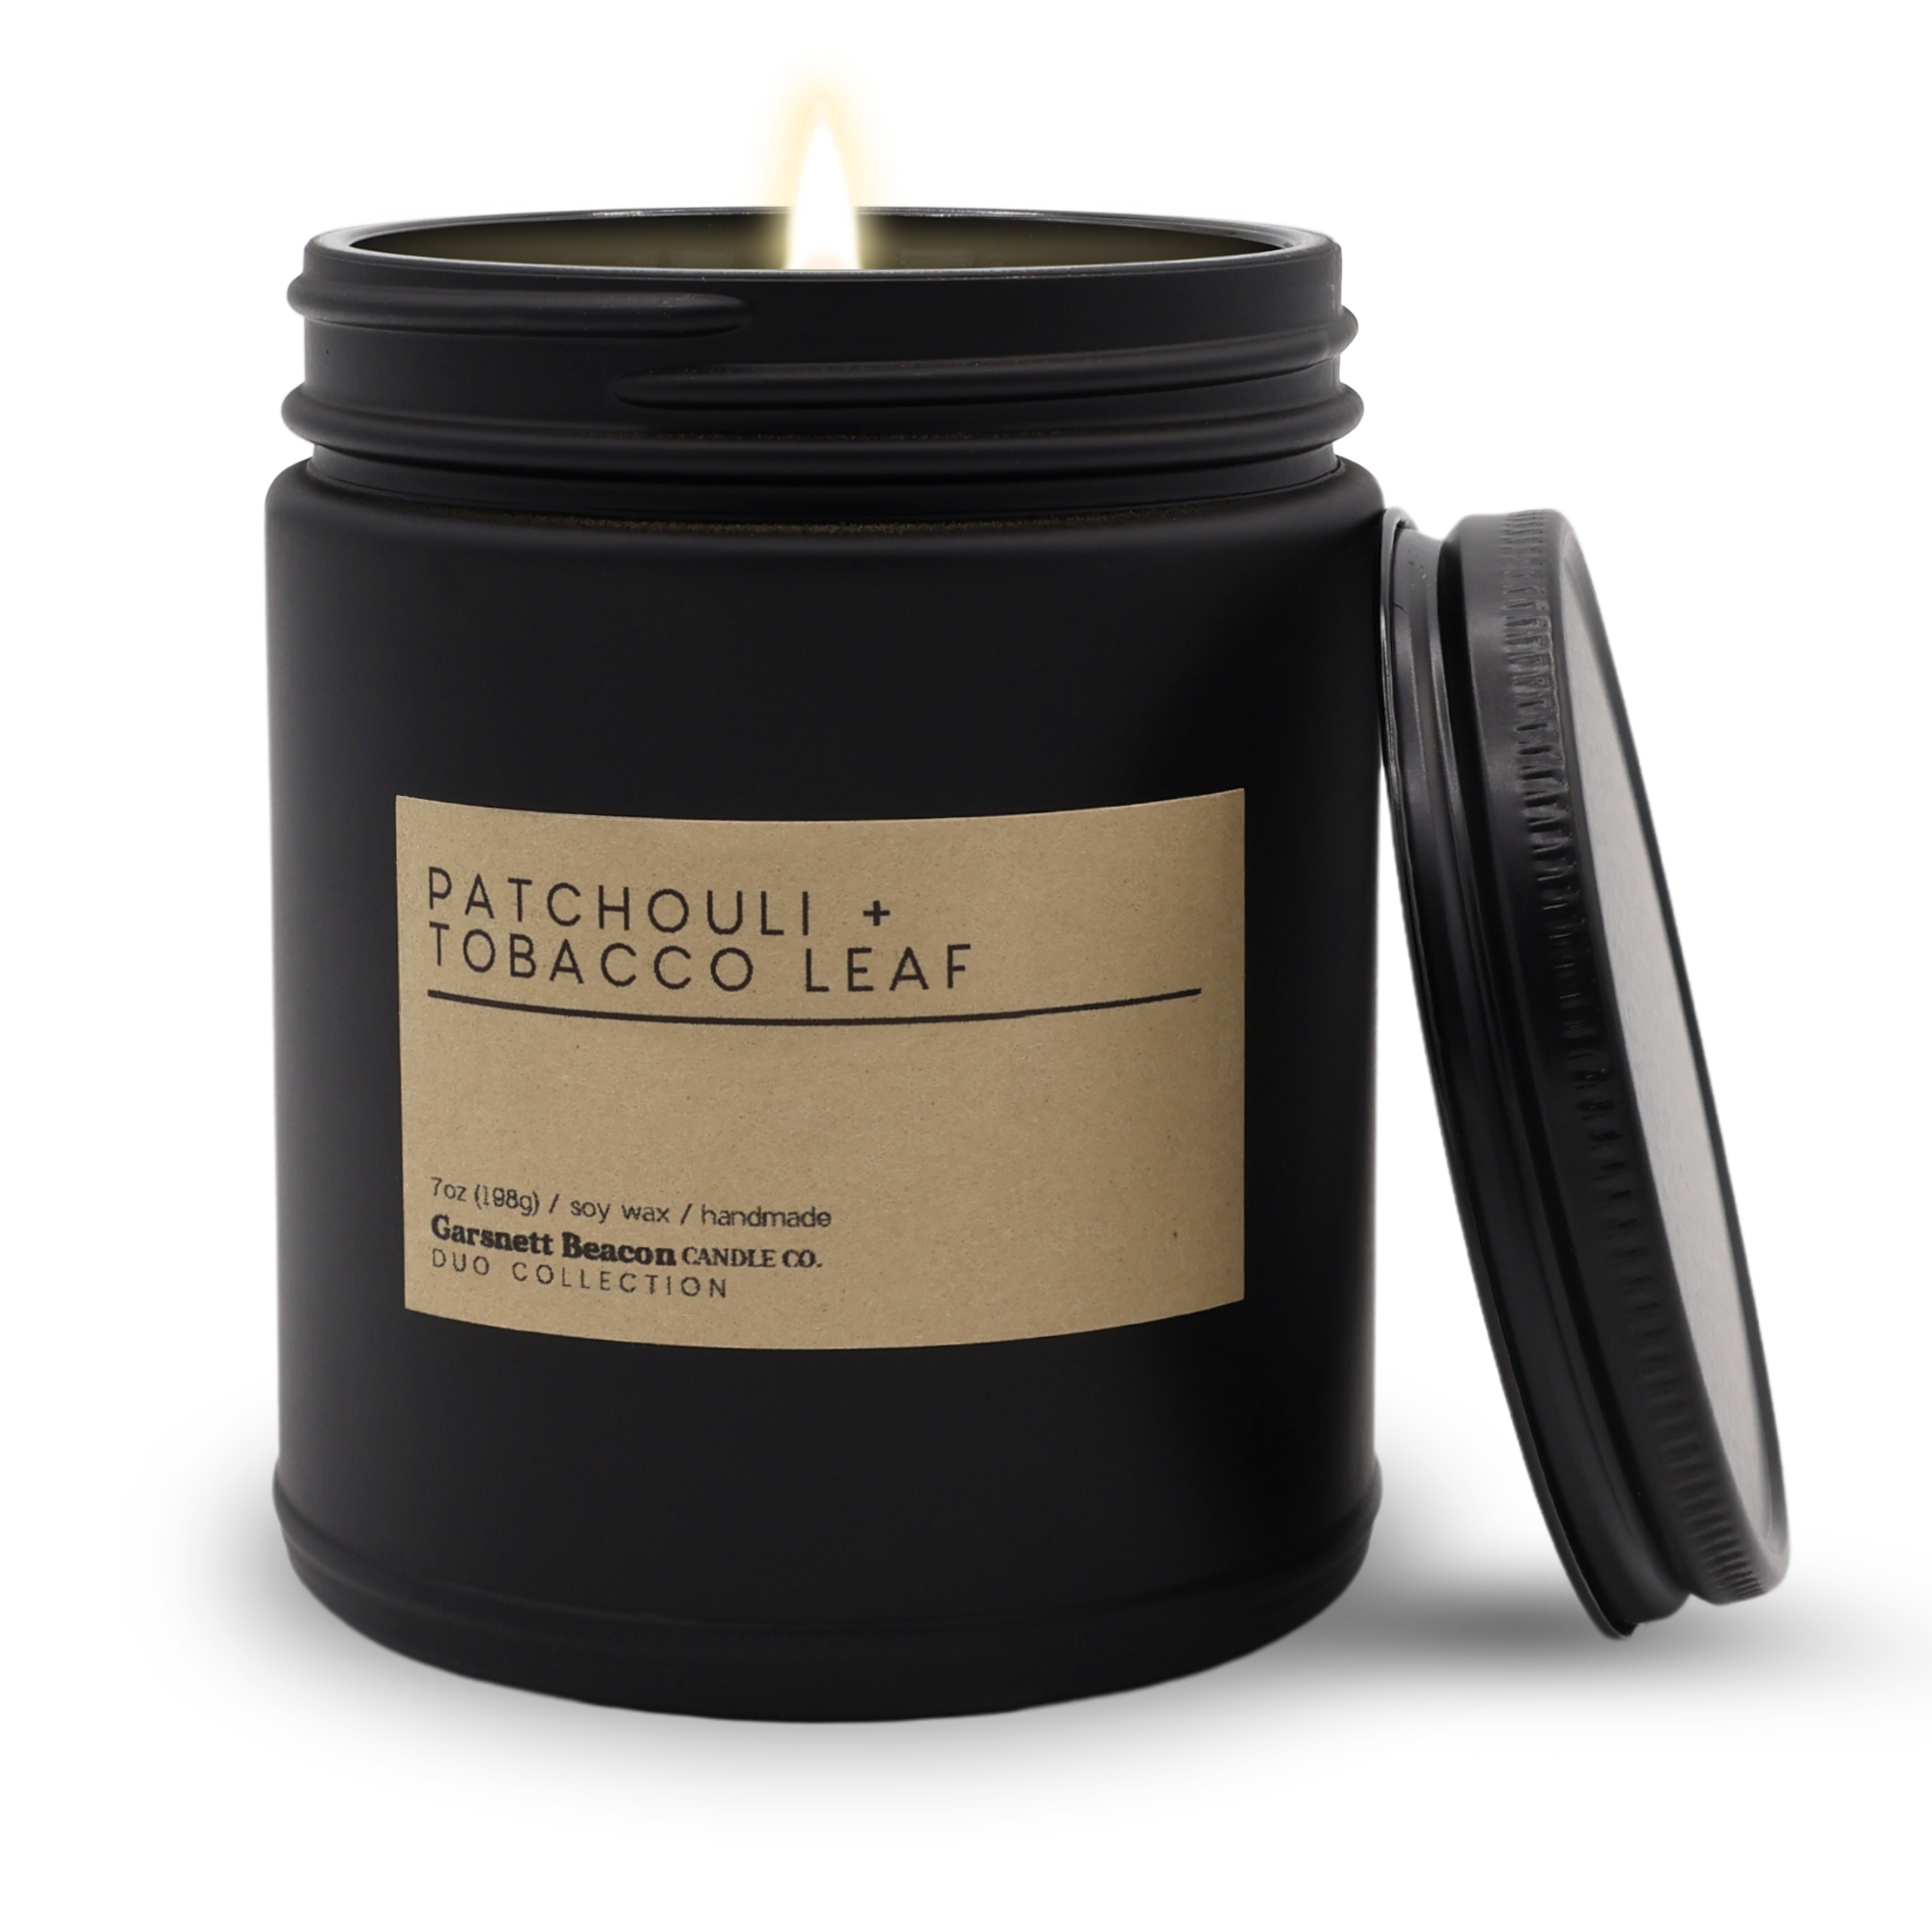 Patchouli + Tobacco Leaf Luxury Scented Candle